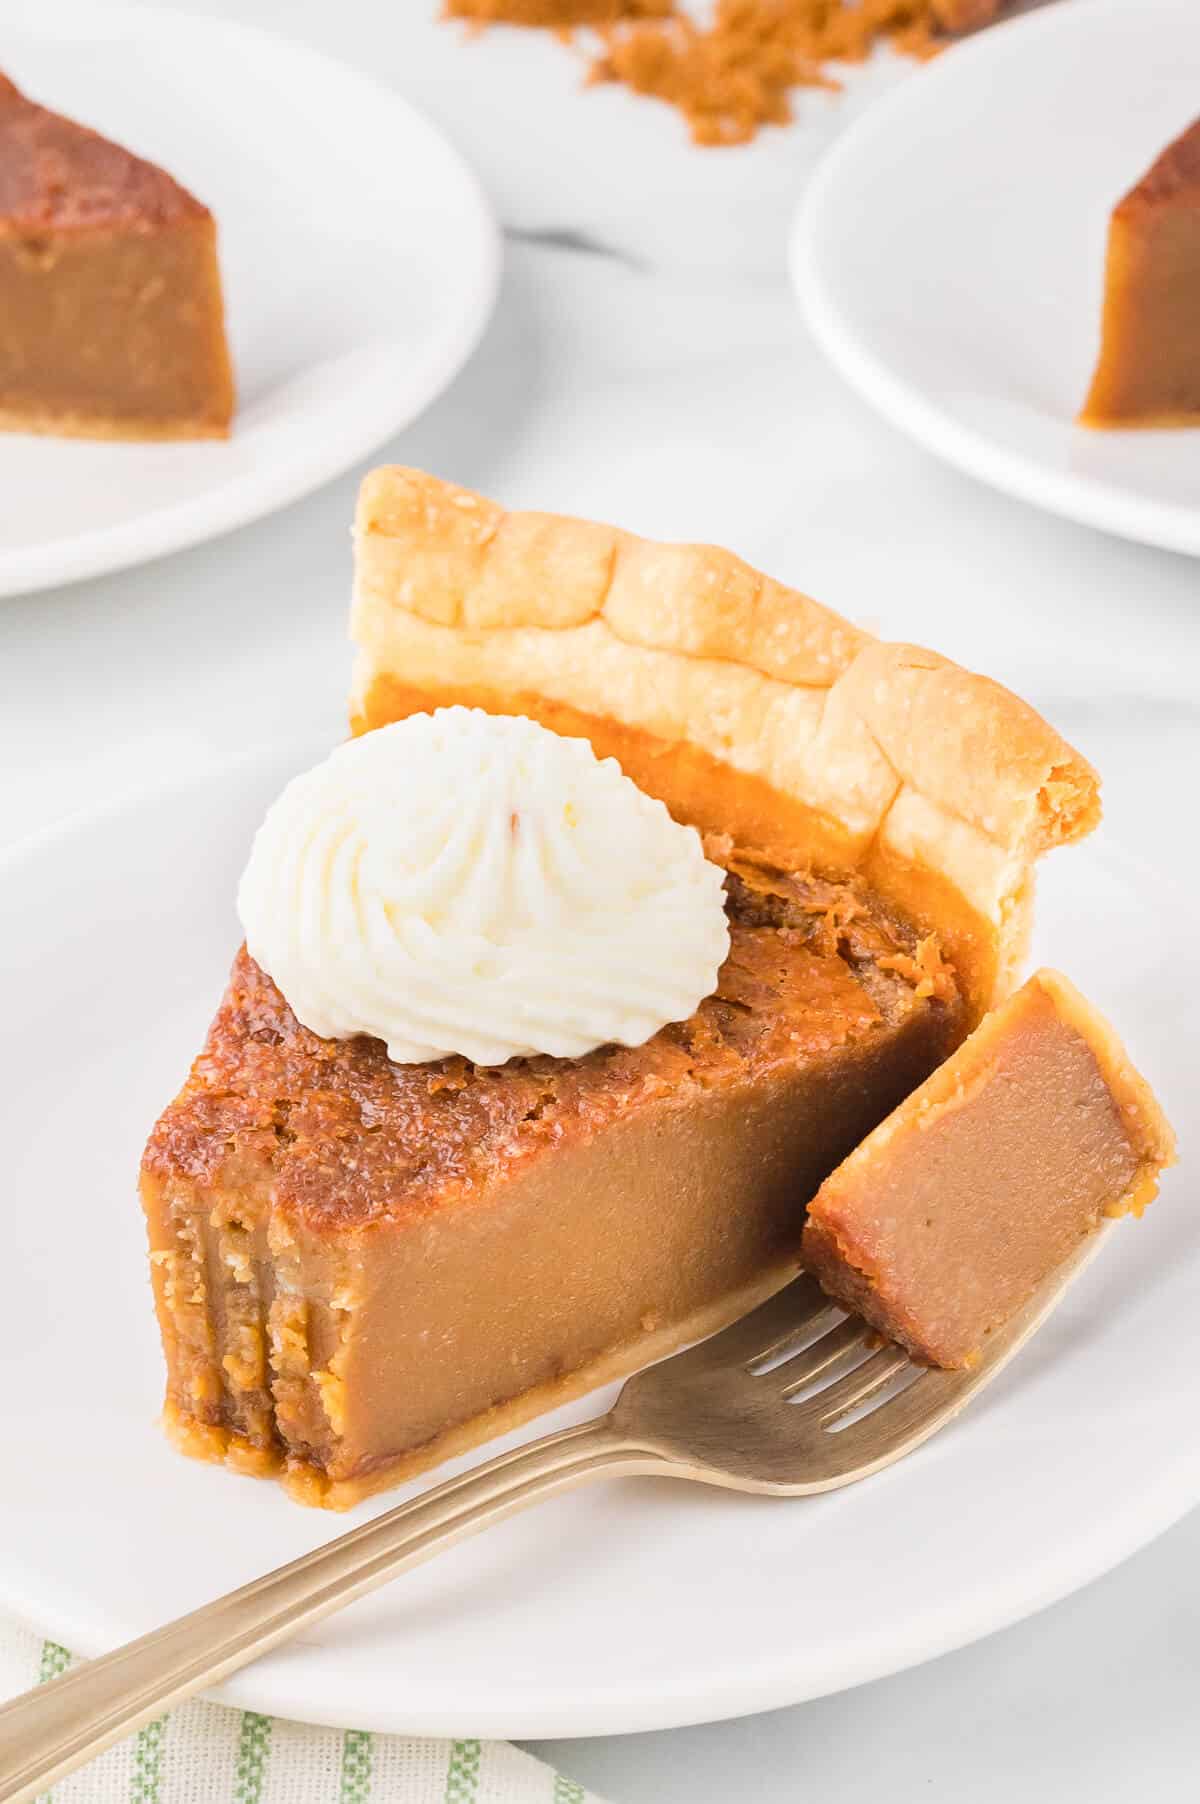 A slice of sugar pie on a plate with a fork with a bite removed.